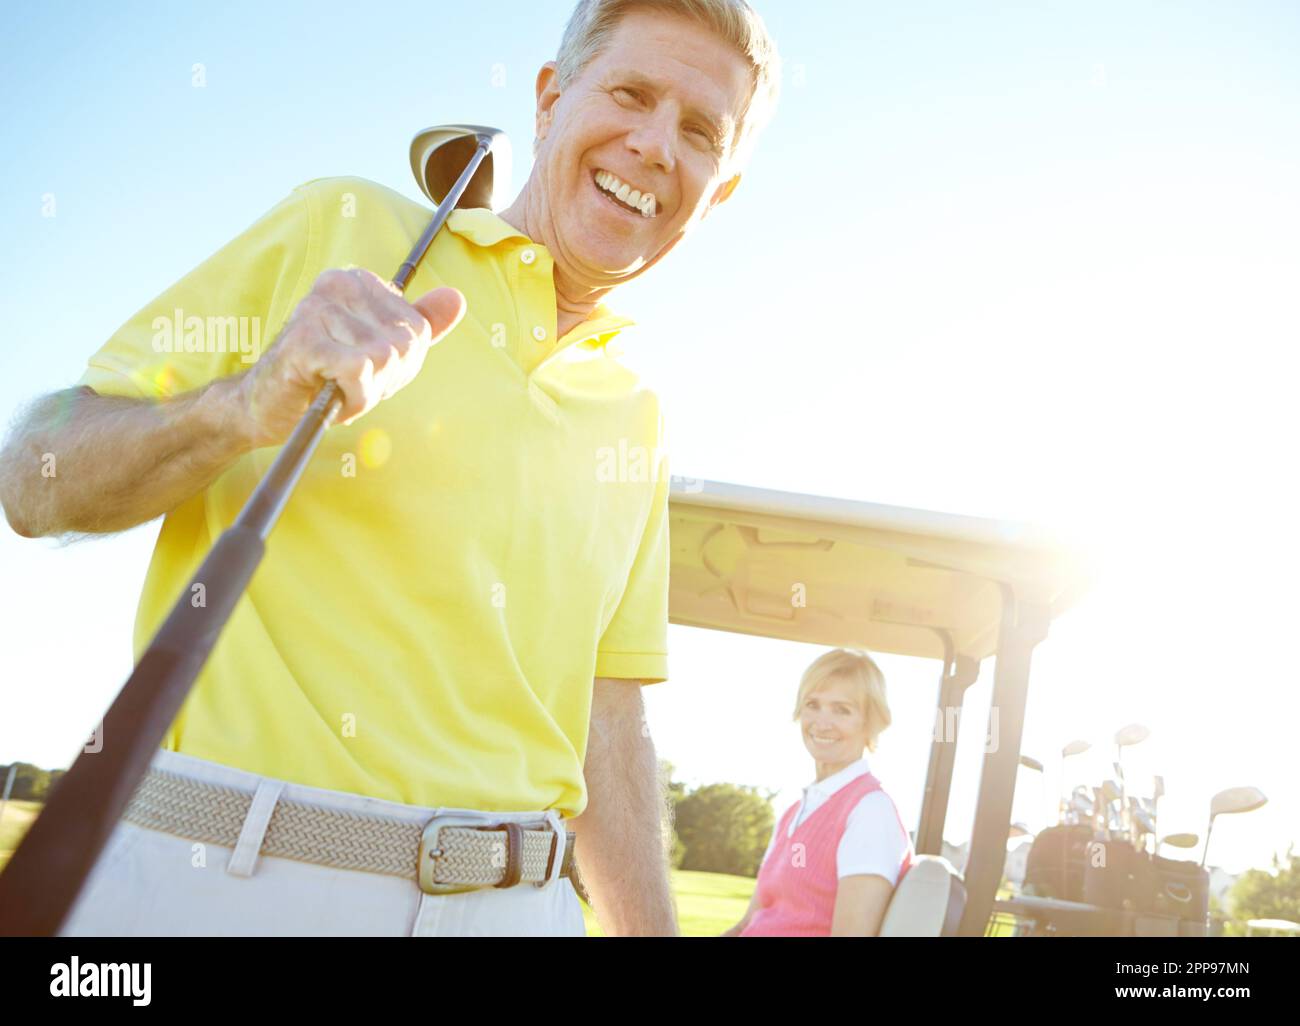 Amateur golfers. Low angle shot of a handsome older golfer standing in front of a golf cart with his golfing buddy behind the wheel. Stock Photo